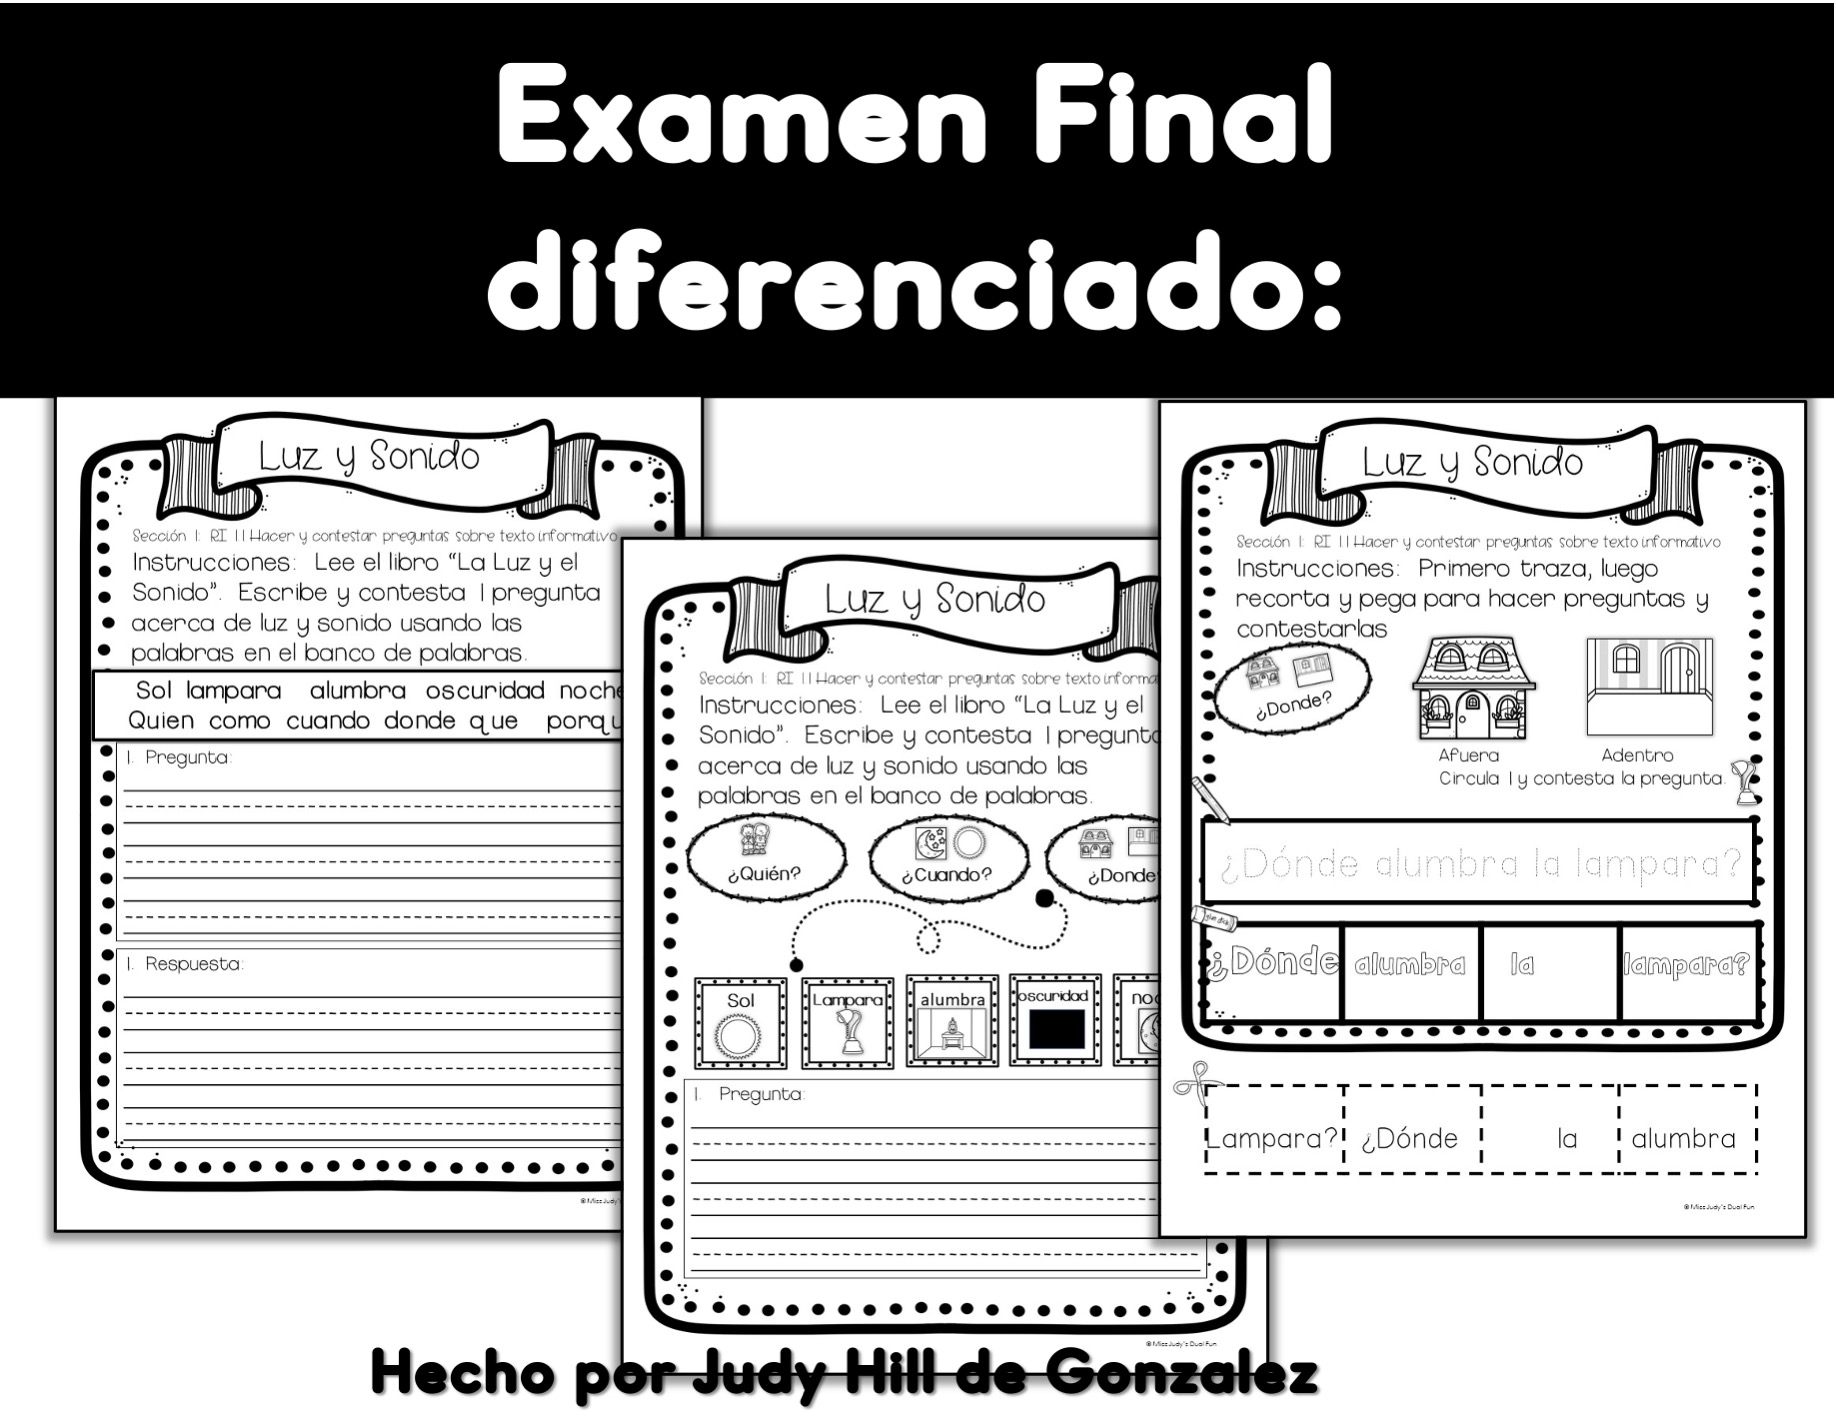 Image of the final exam in Spanish for Luz y Sonido